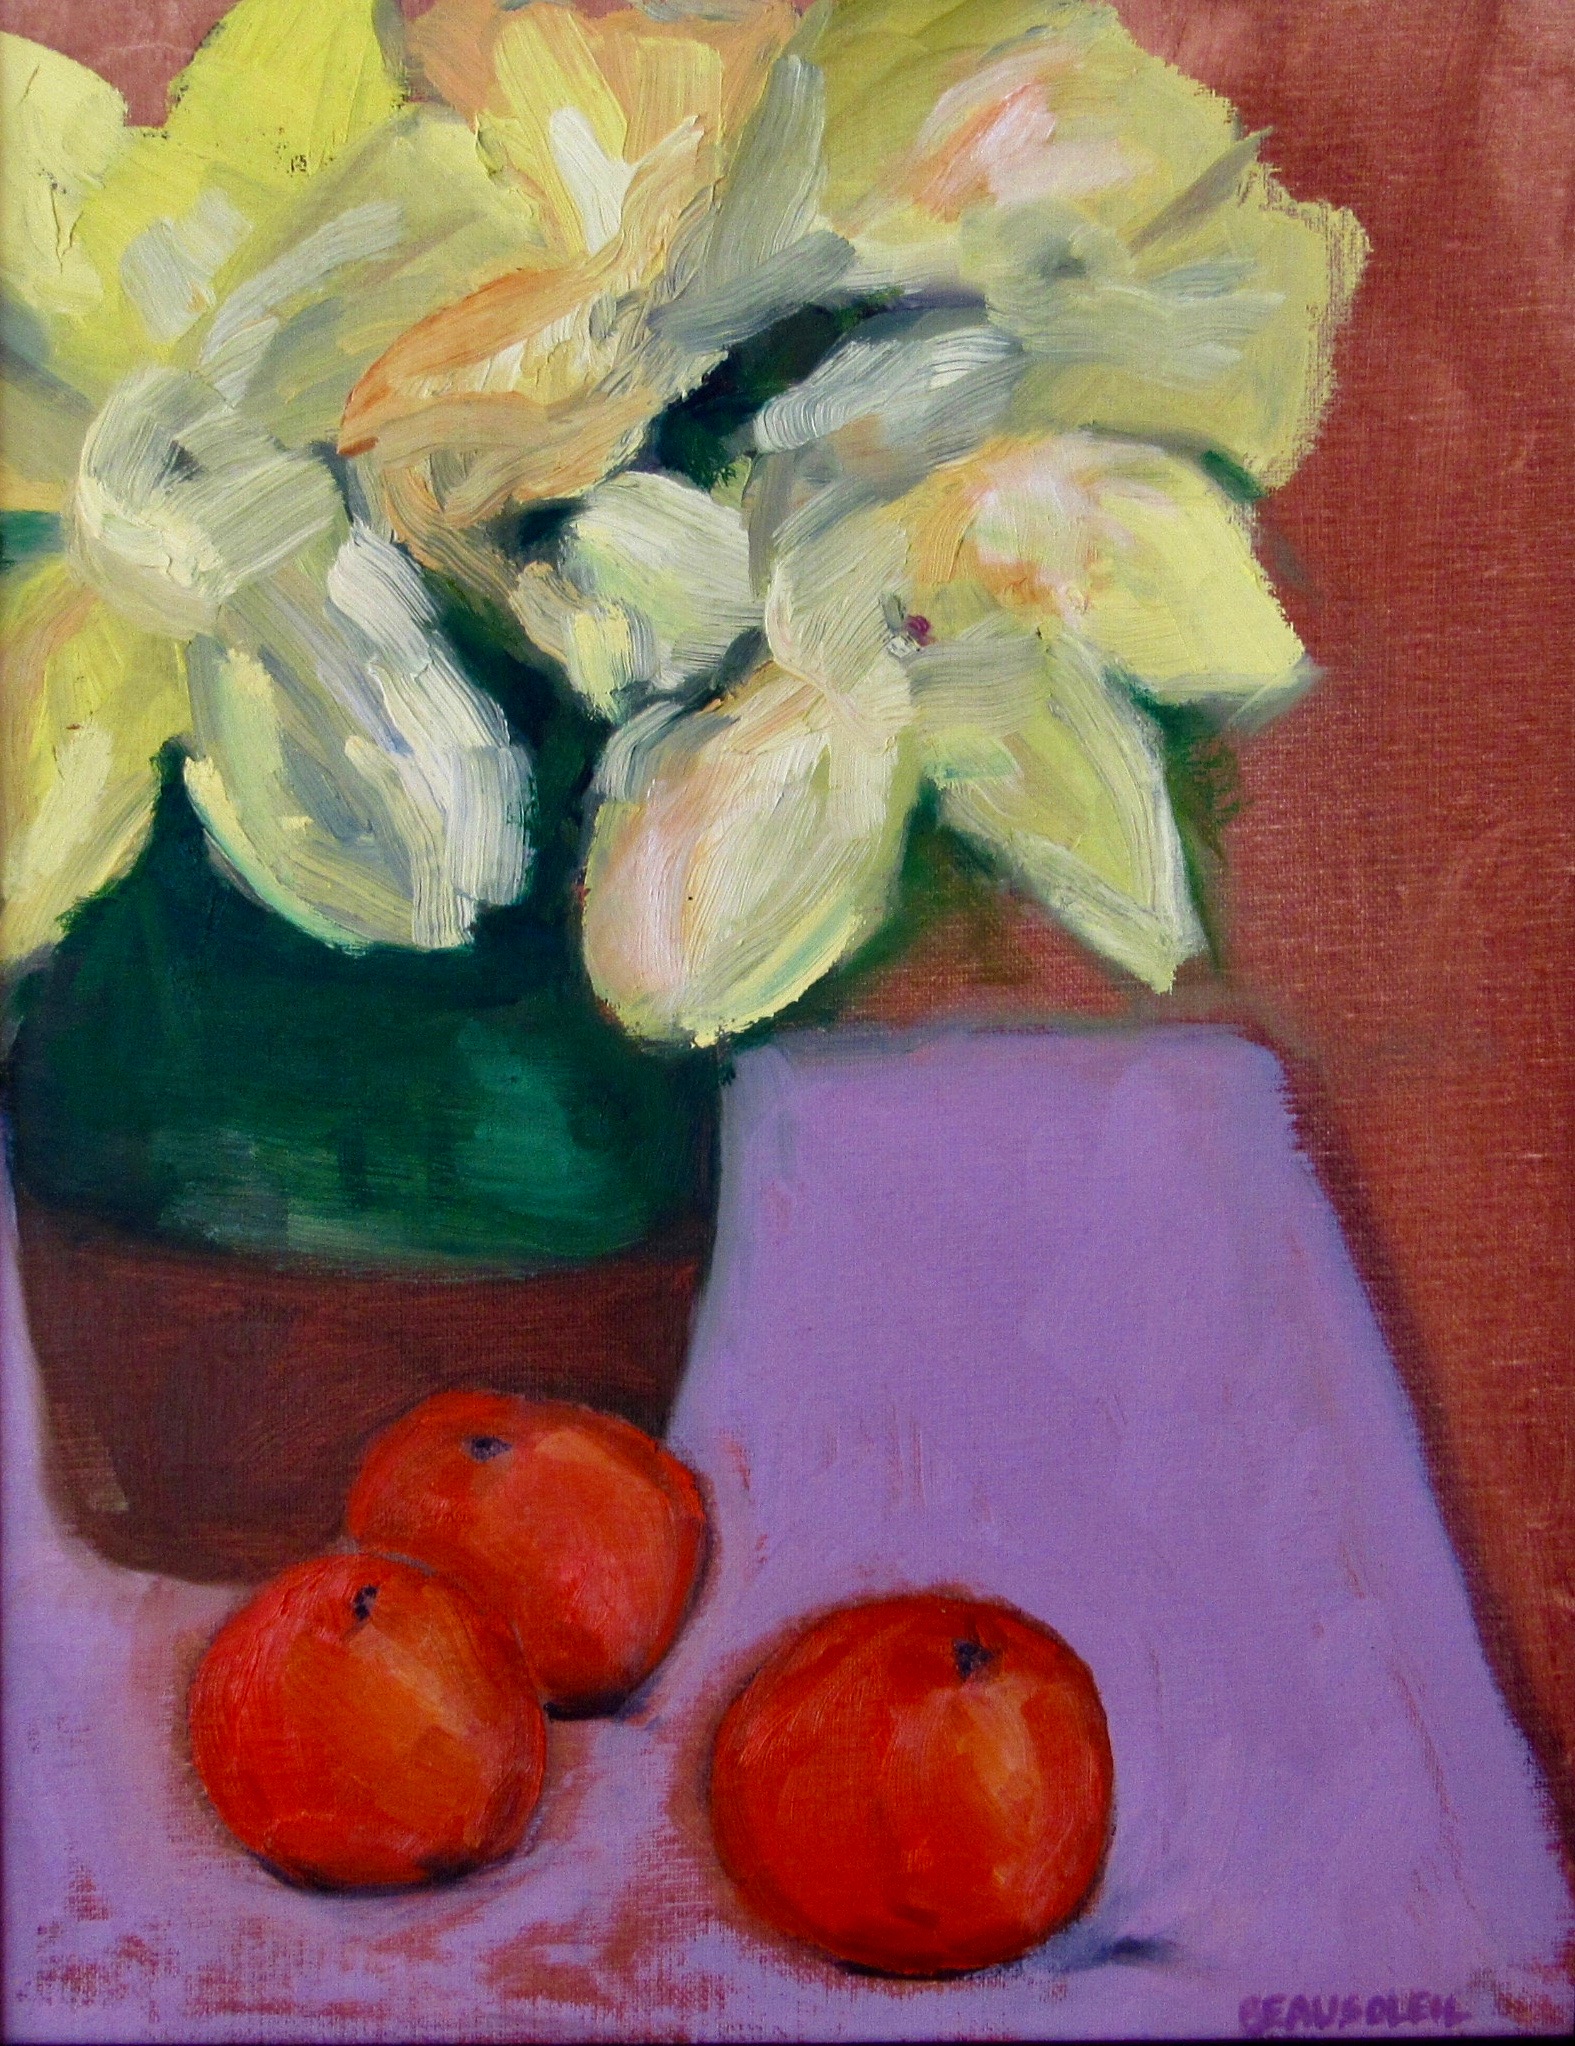 Lilies and Tangerines, 2018